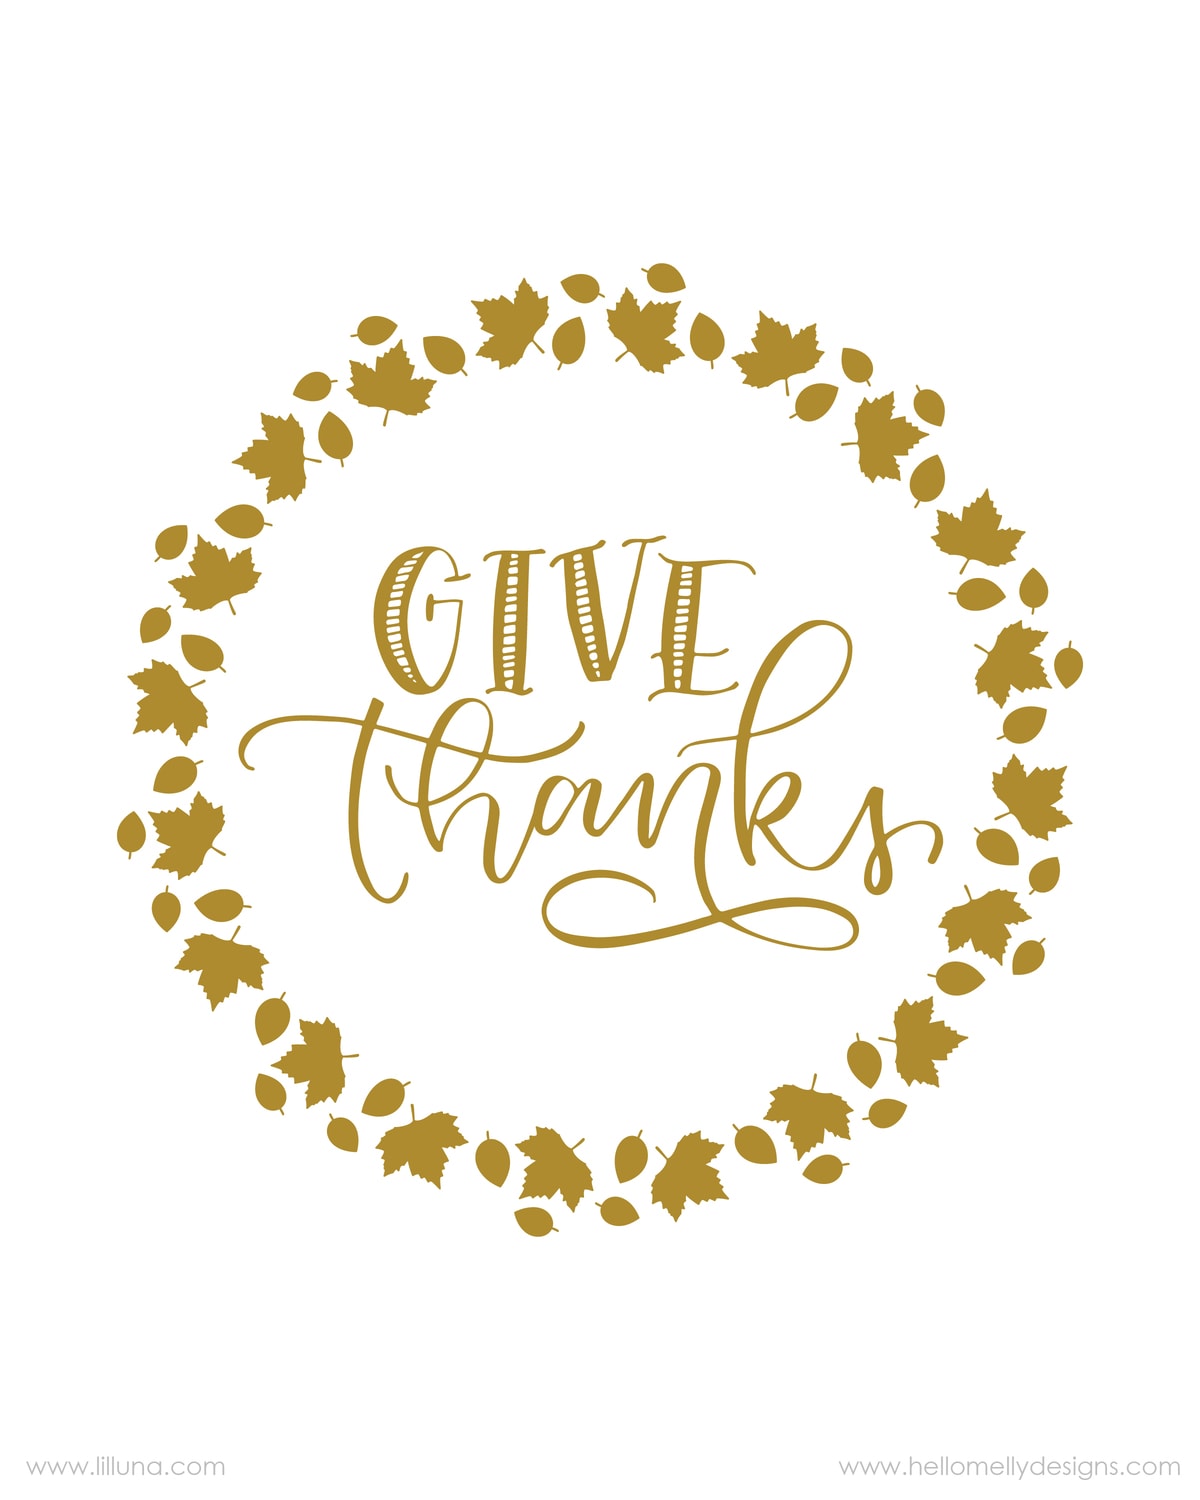 FREE Give Thanks Prints available to download in 3 colors - perfect to print, frame and display for Thanksgiving!